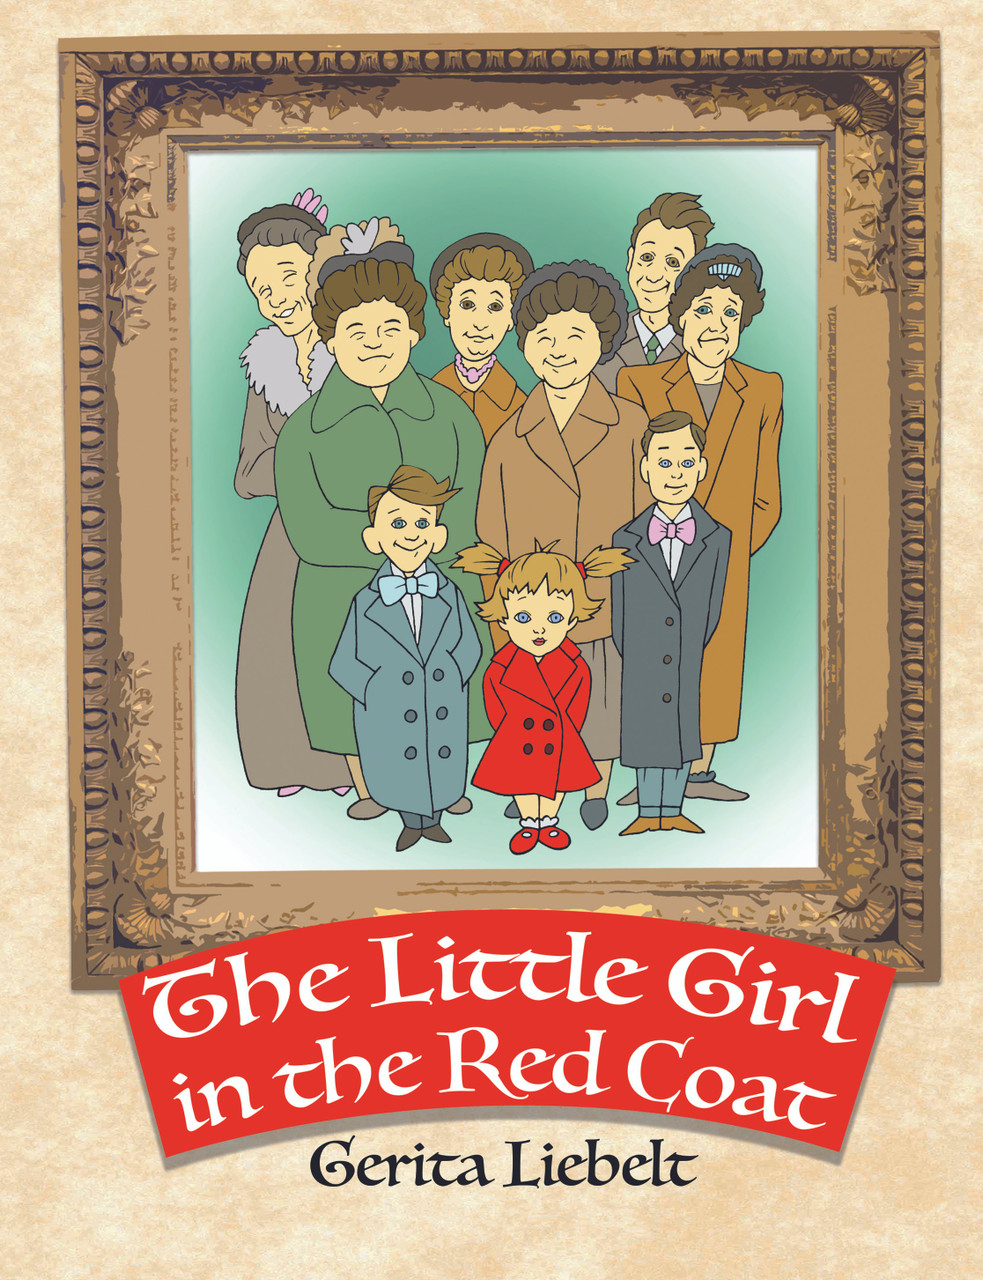 THE LITTLE GIRL IN THE RED COAT